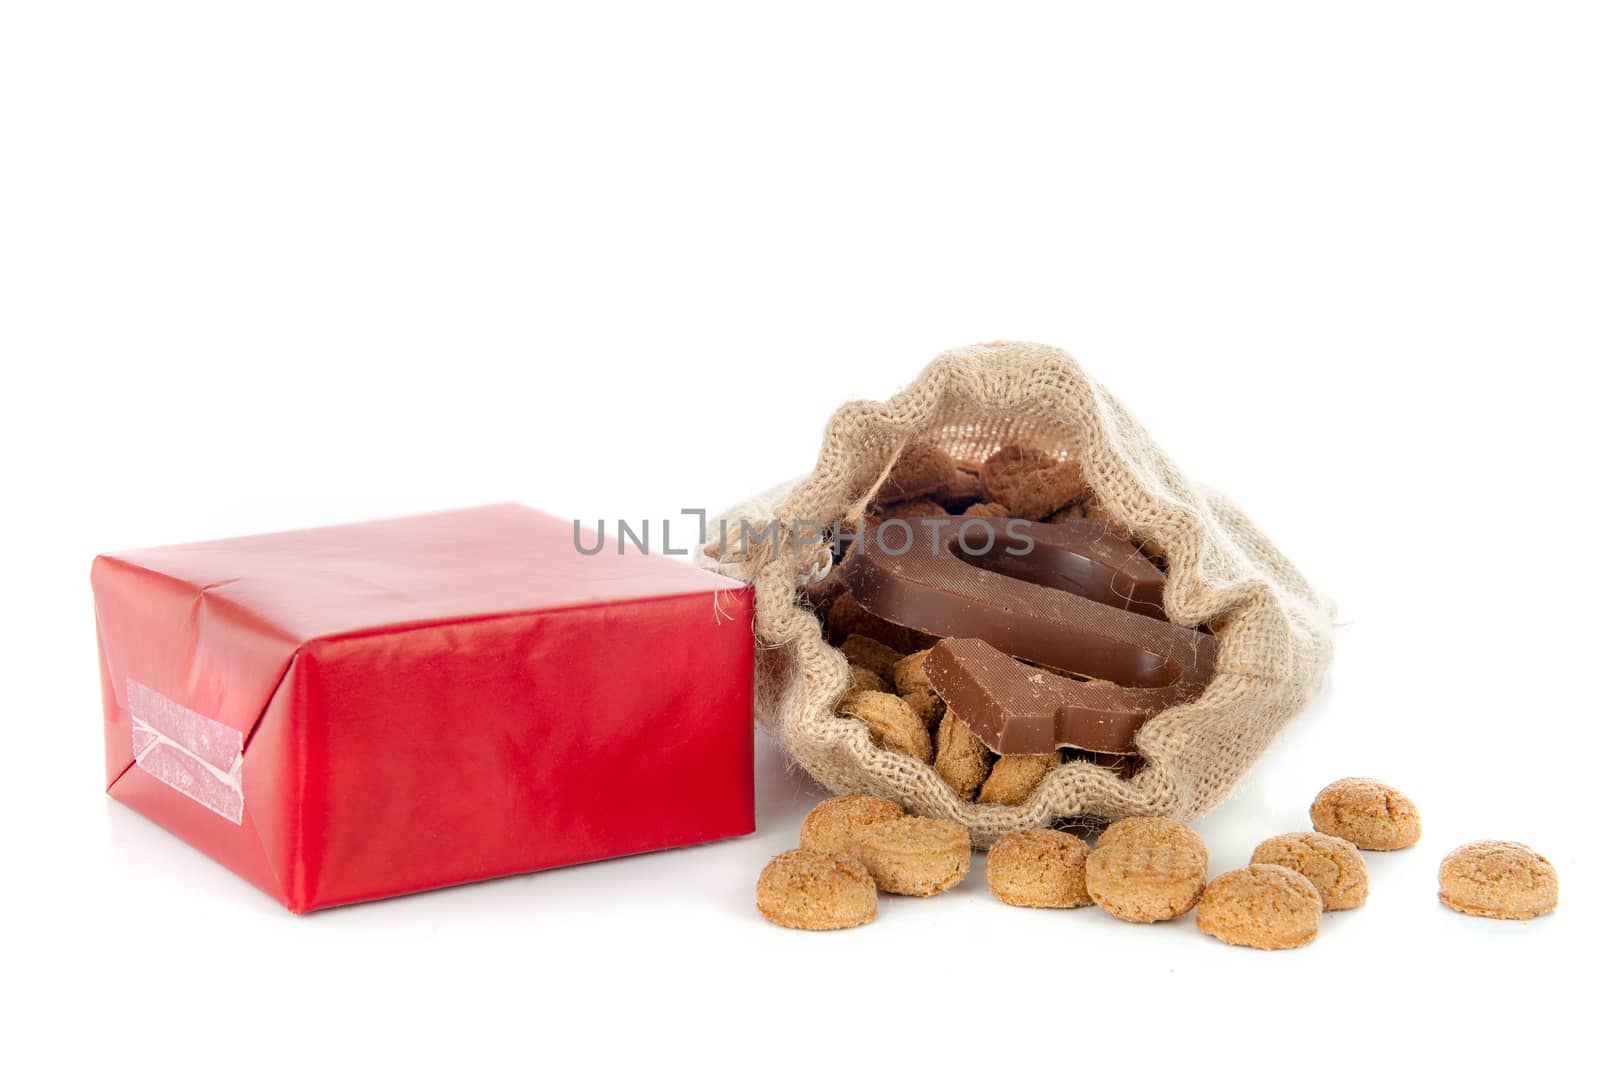 A jute bag full of pepernoten and a chocolate letter, for celebrating a dutch holiday " Sinterklaas "  on the fifth of December